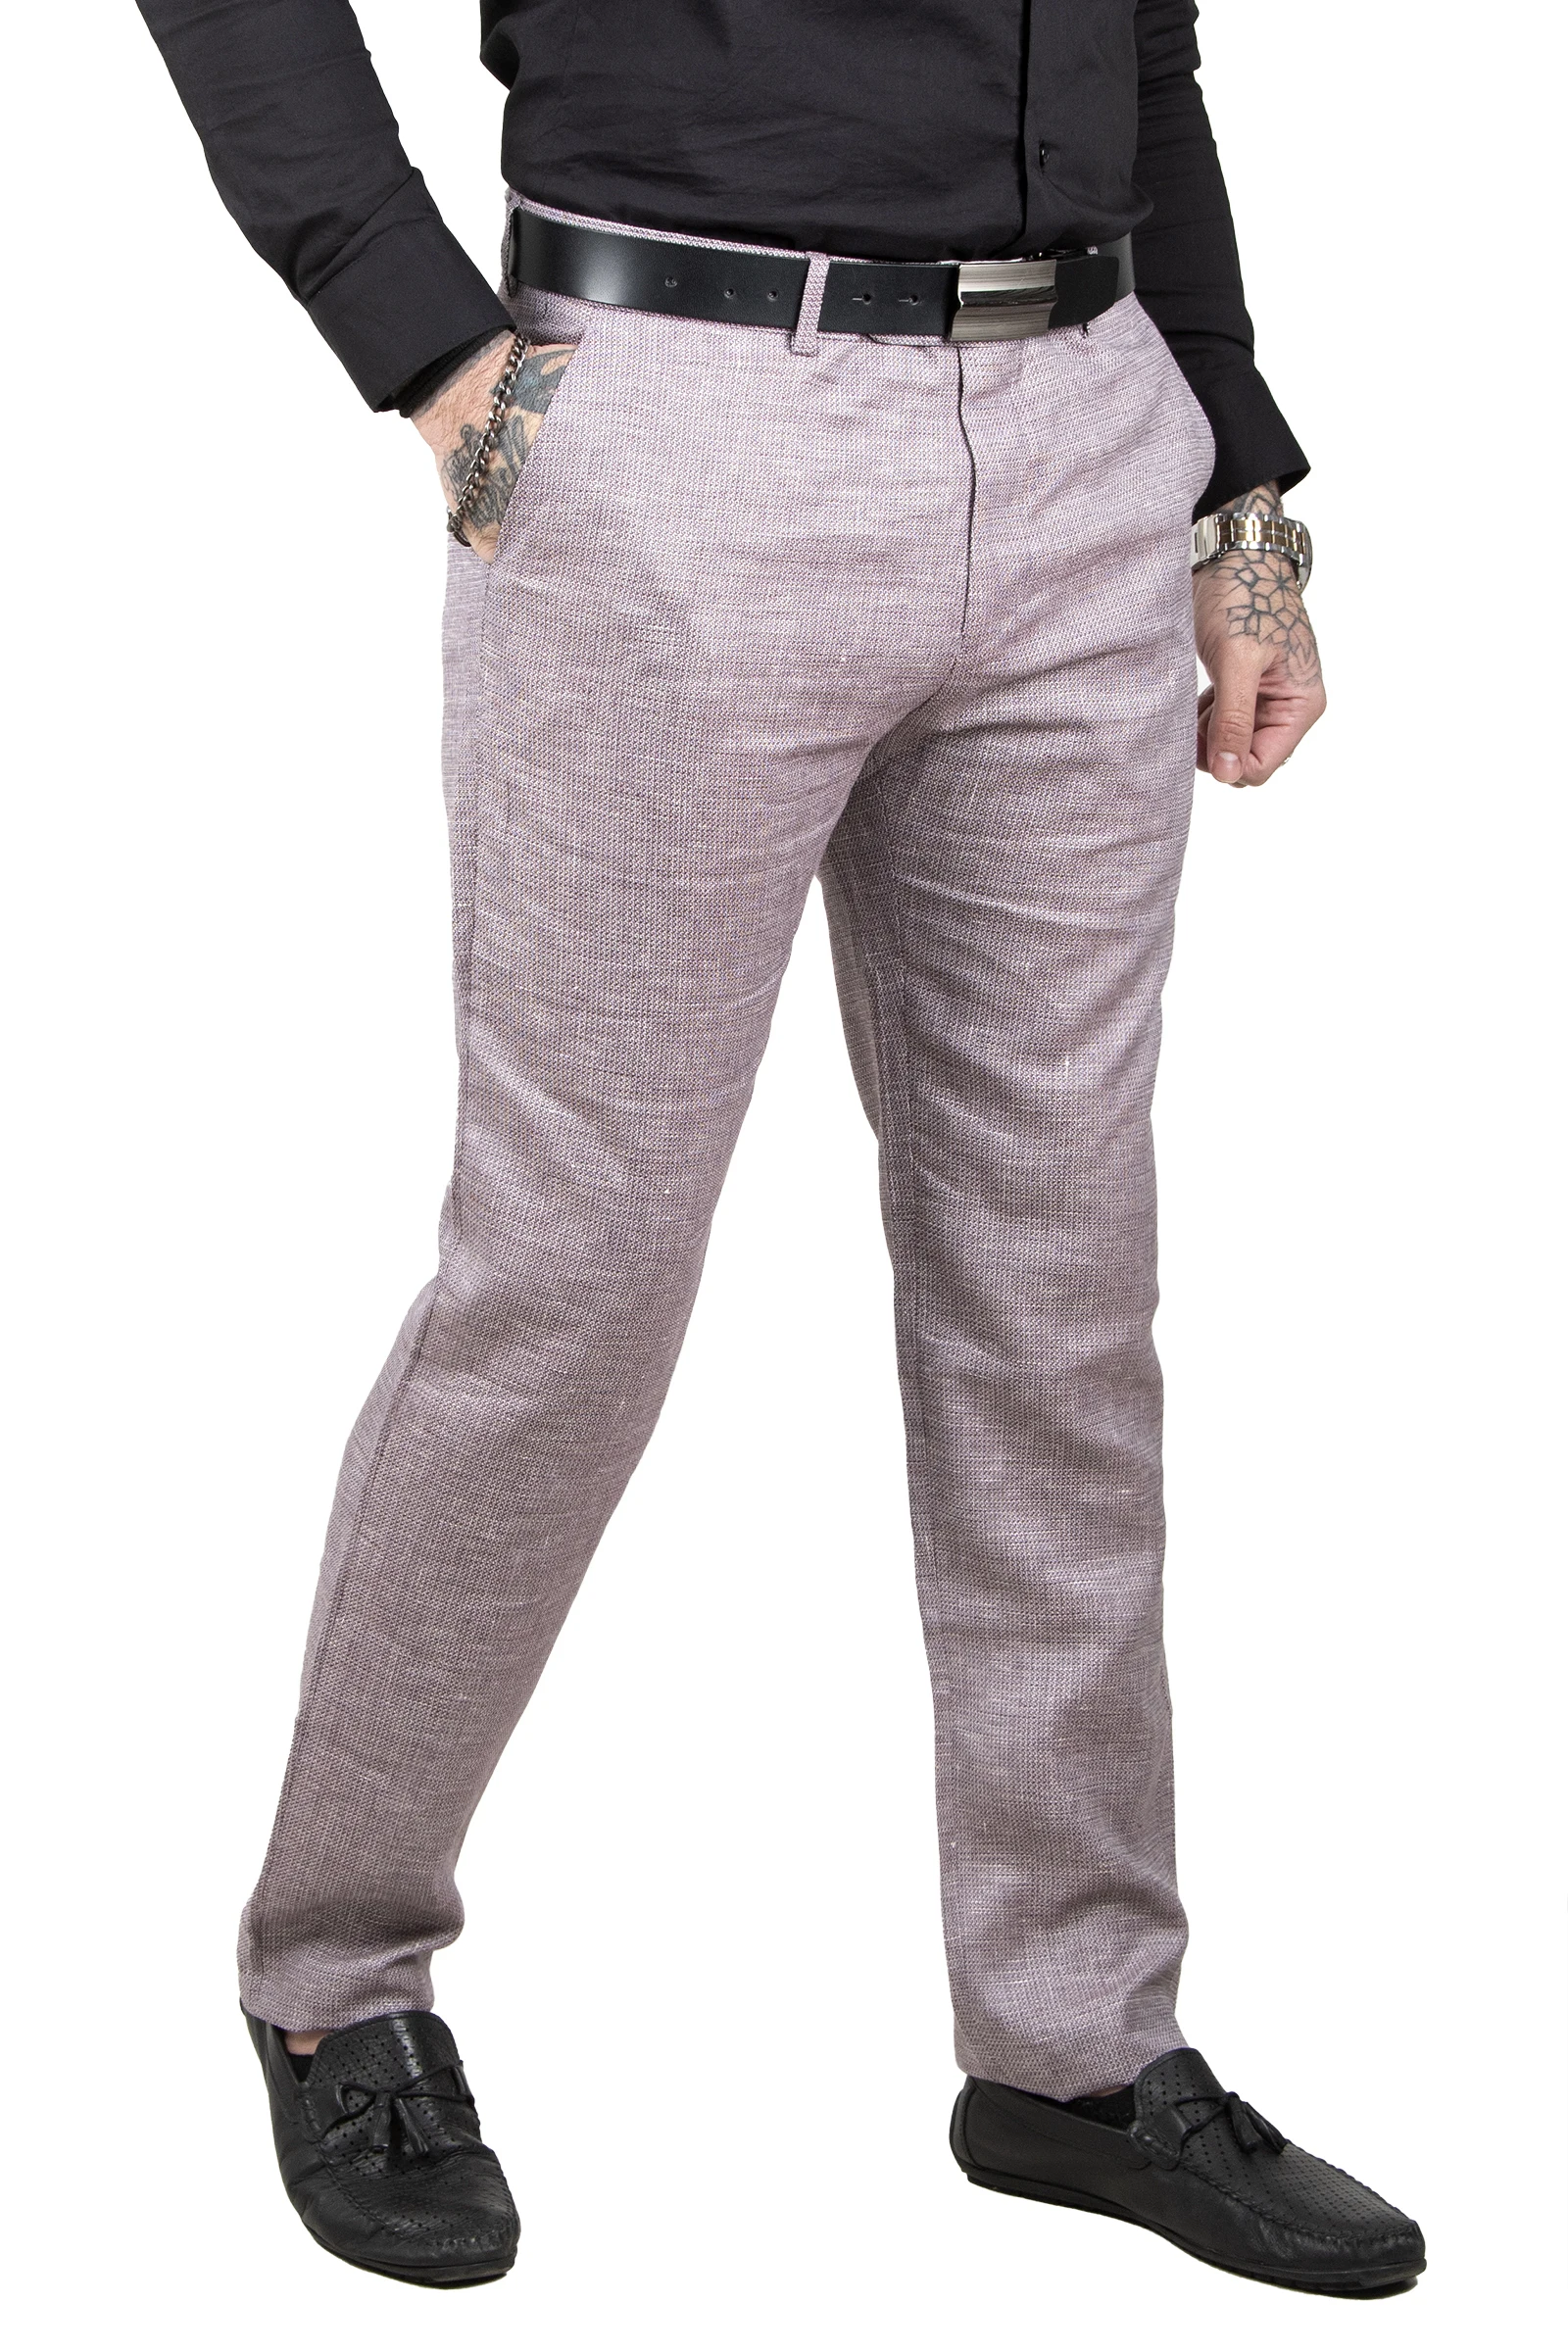 

DeepSEA Patterned Back Pocket With Lid Pettitoes Straight Male Cloth Trousers 2304616